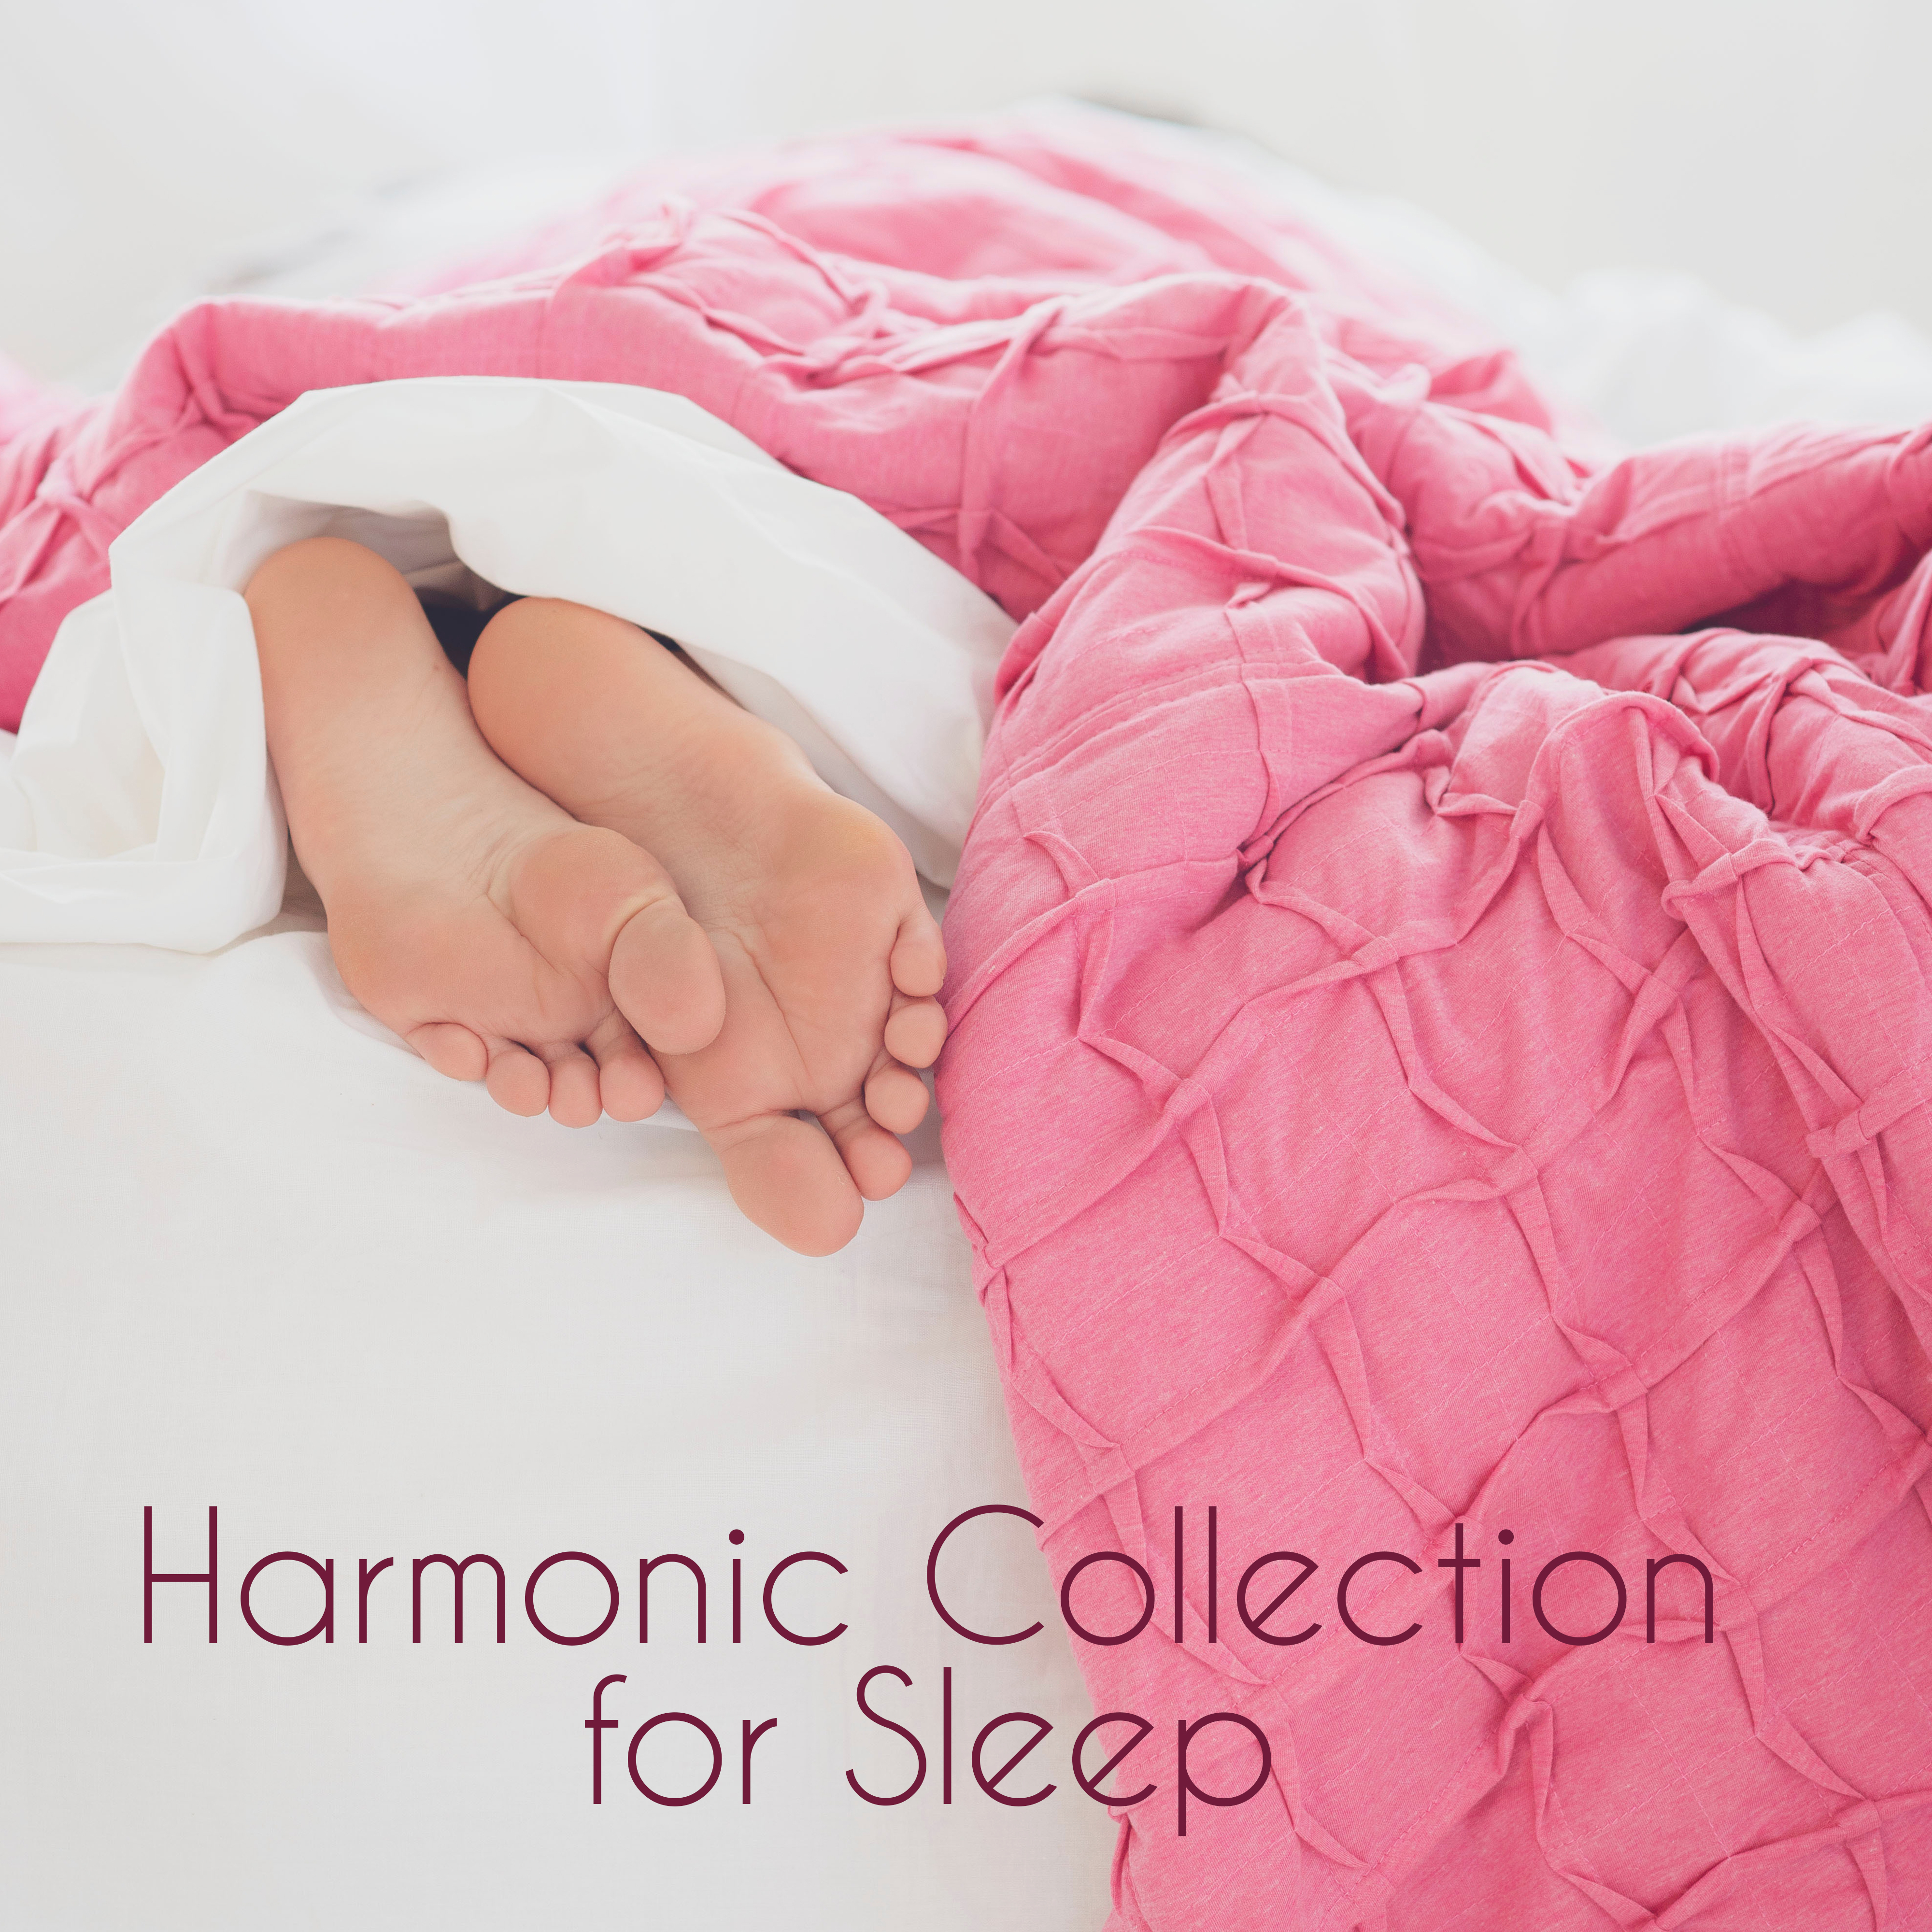 Harmonic Collection for Sleep  Sleep Songs, Relaxing Therapy, Deep Harmony, Sleep Melodies, Pure Mind, Perfect Relax Zone